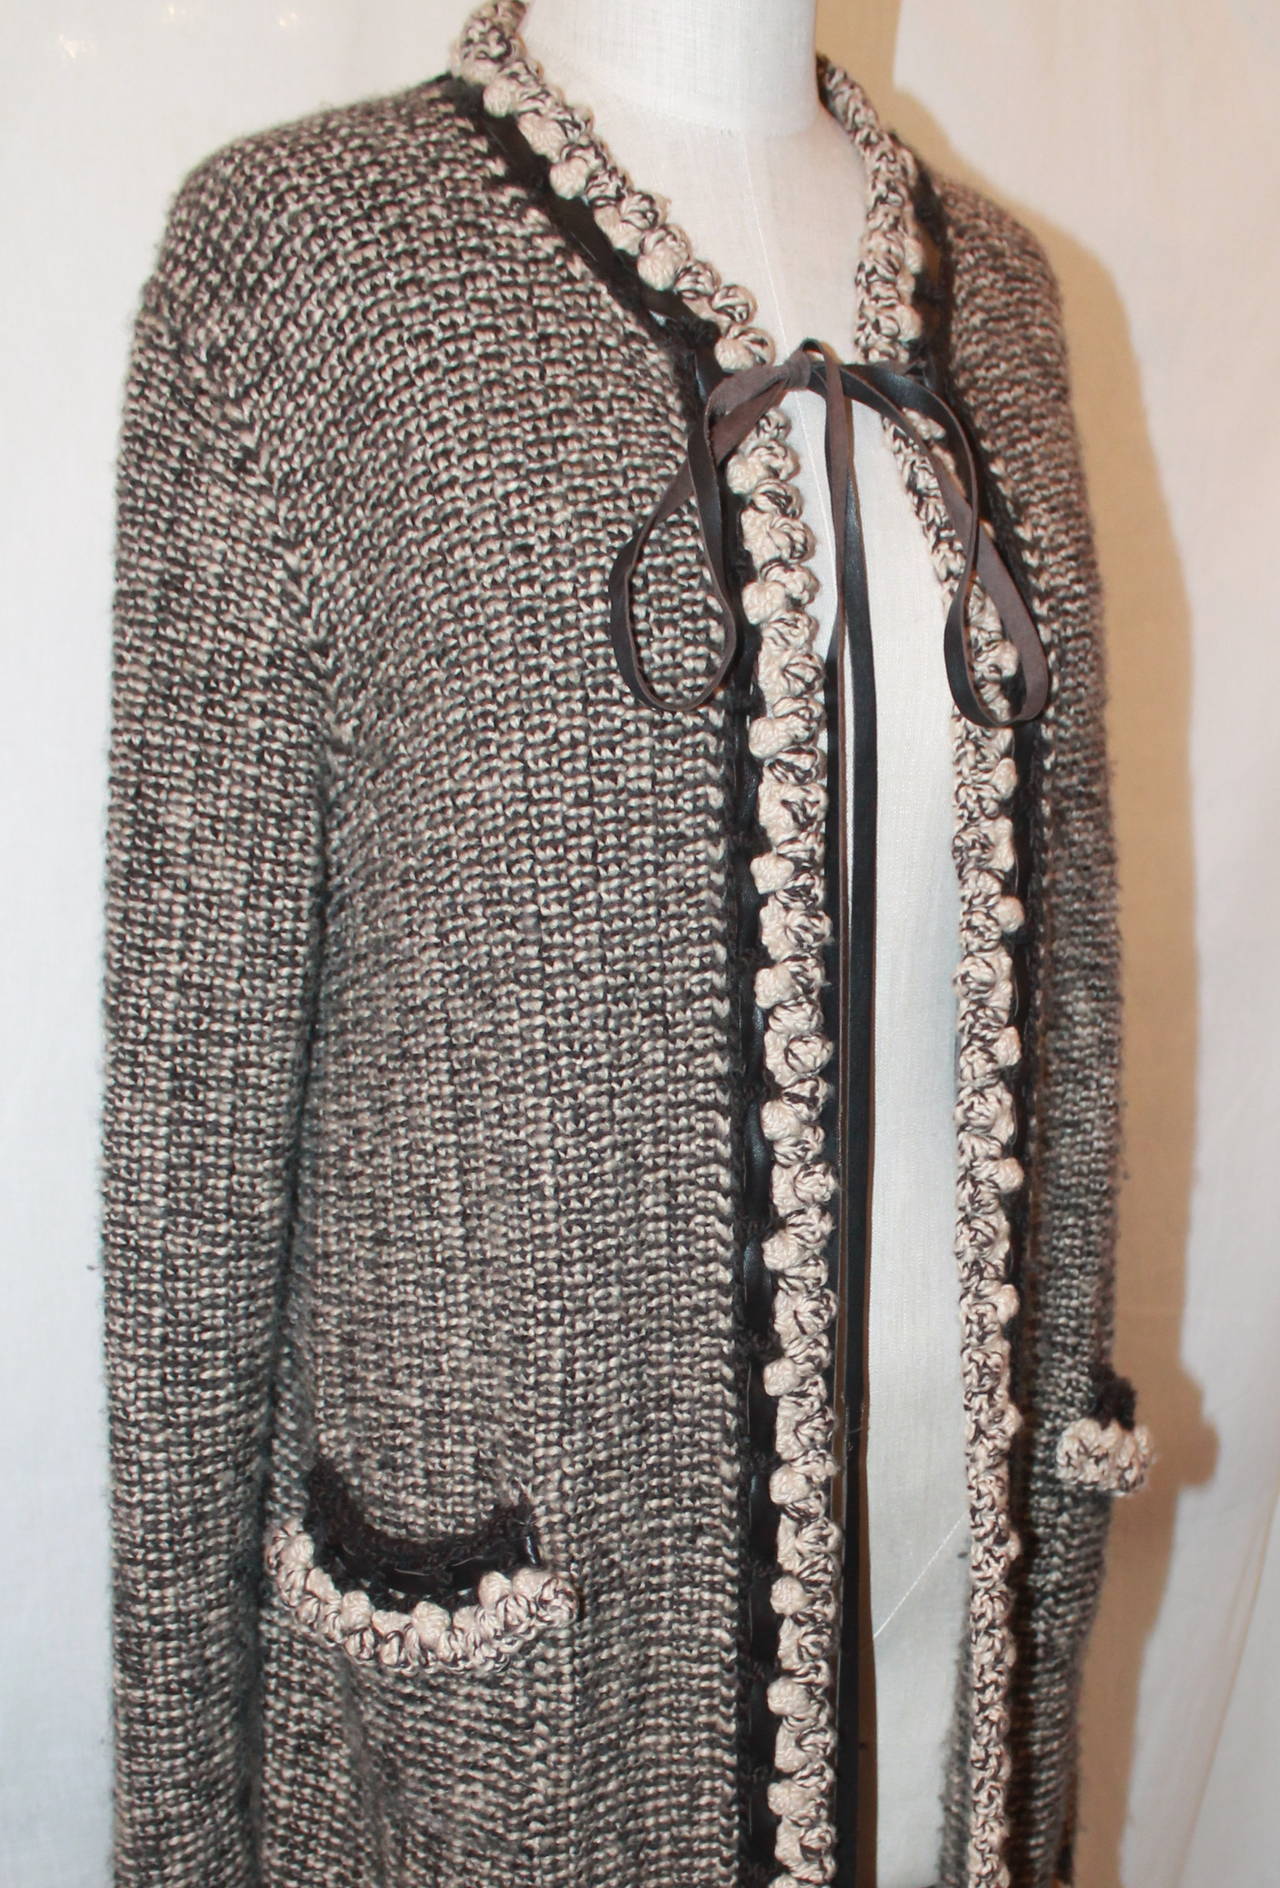 Chanel Brown Cashmere Woven Coat with Leather Trim - 40. This coat is in excellent condition and has crochet & leather trim.

Measurements:
Bust- 36